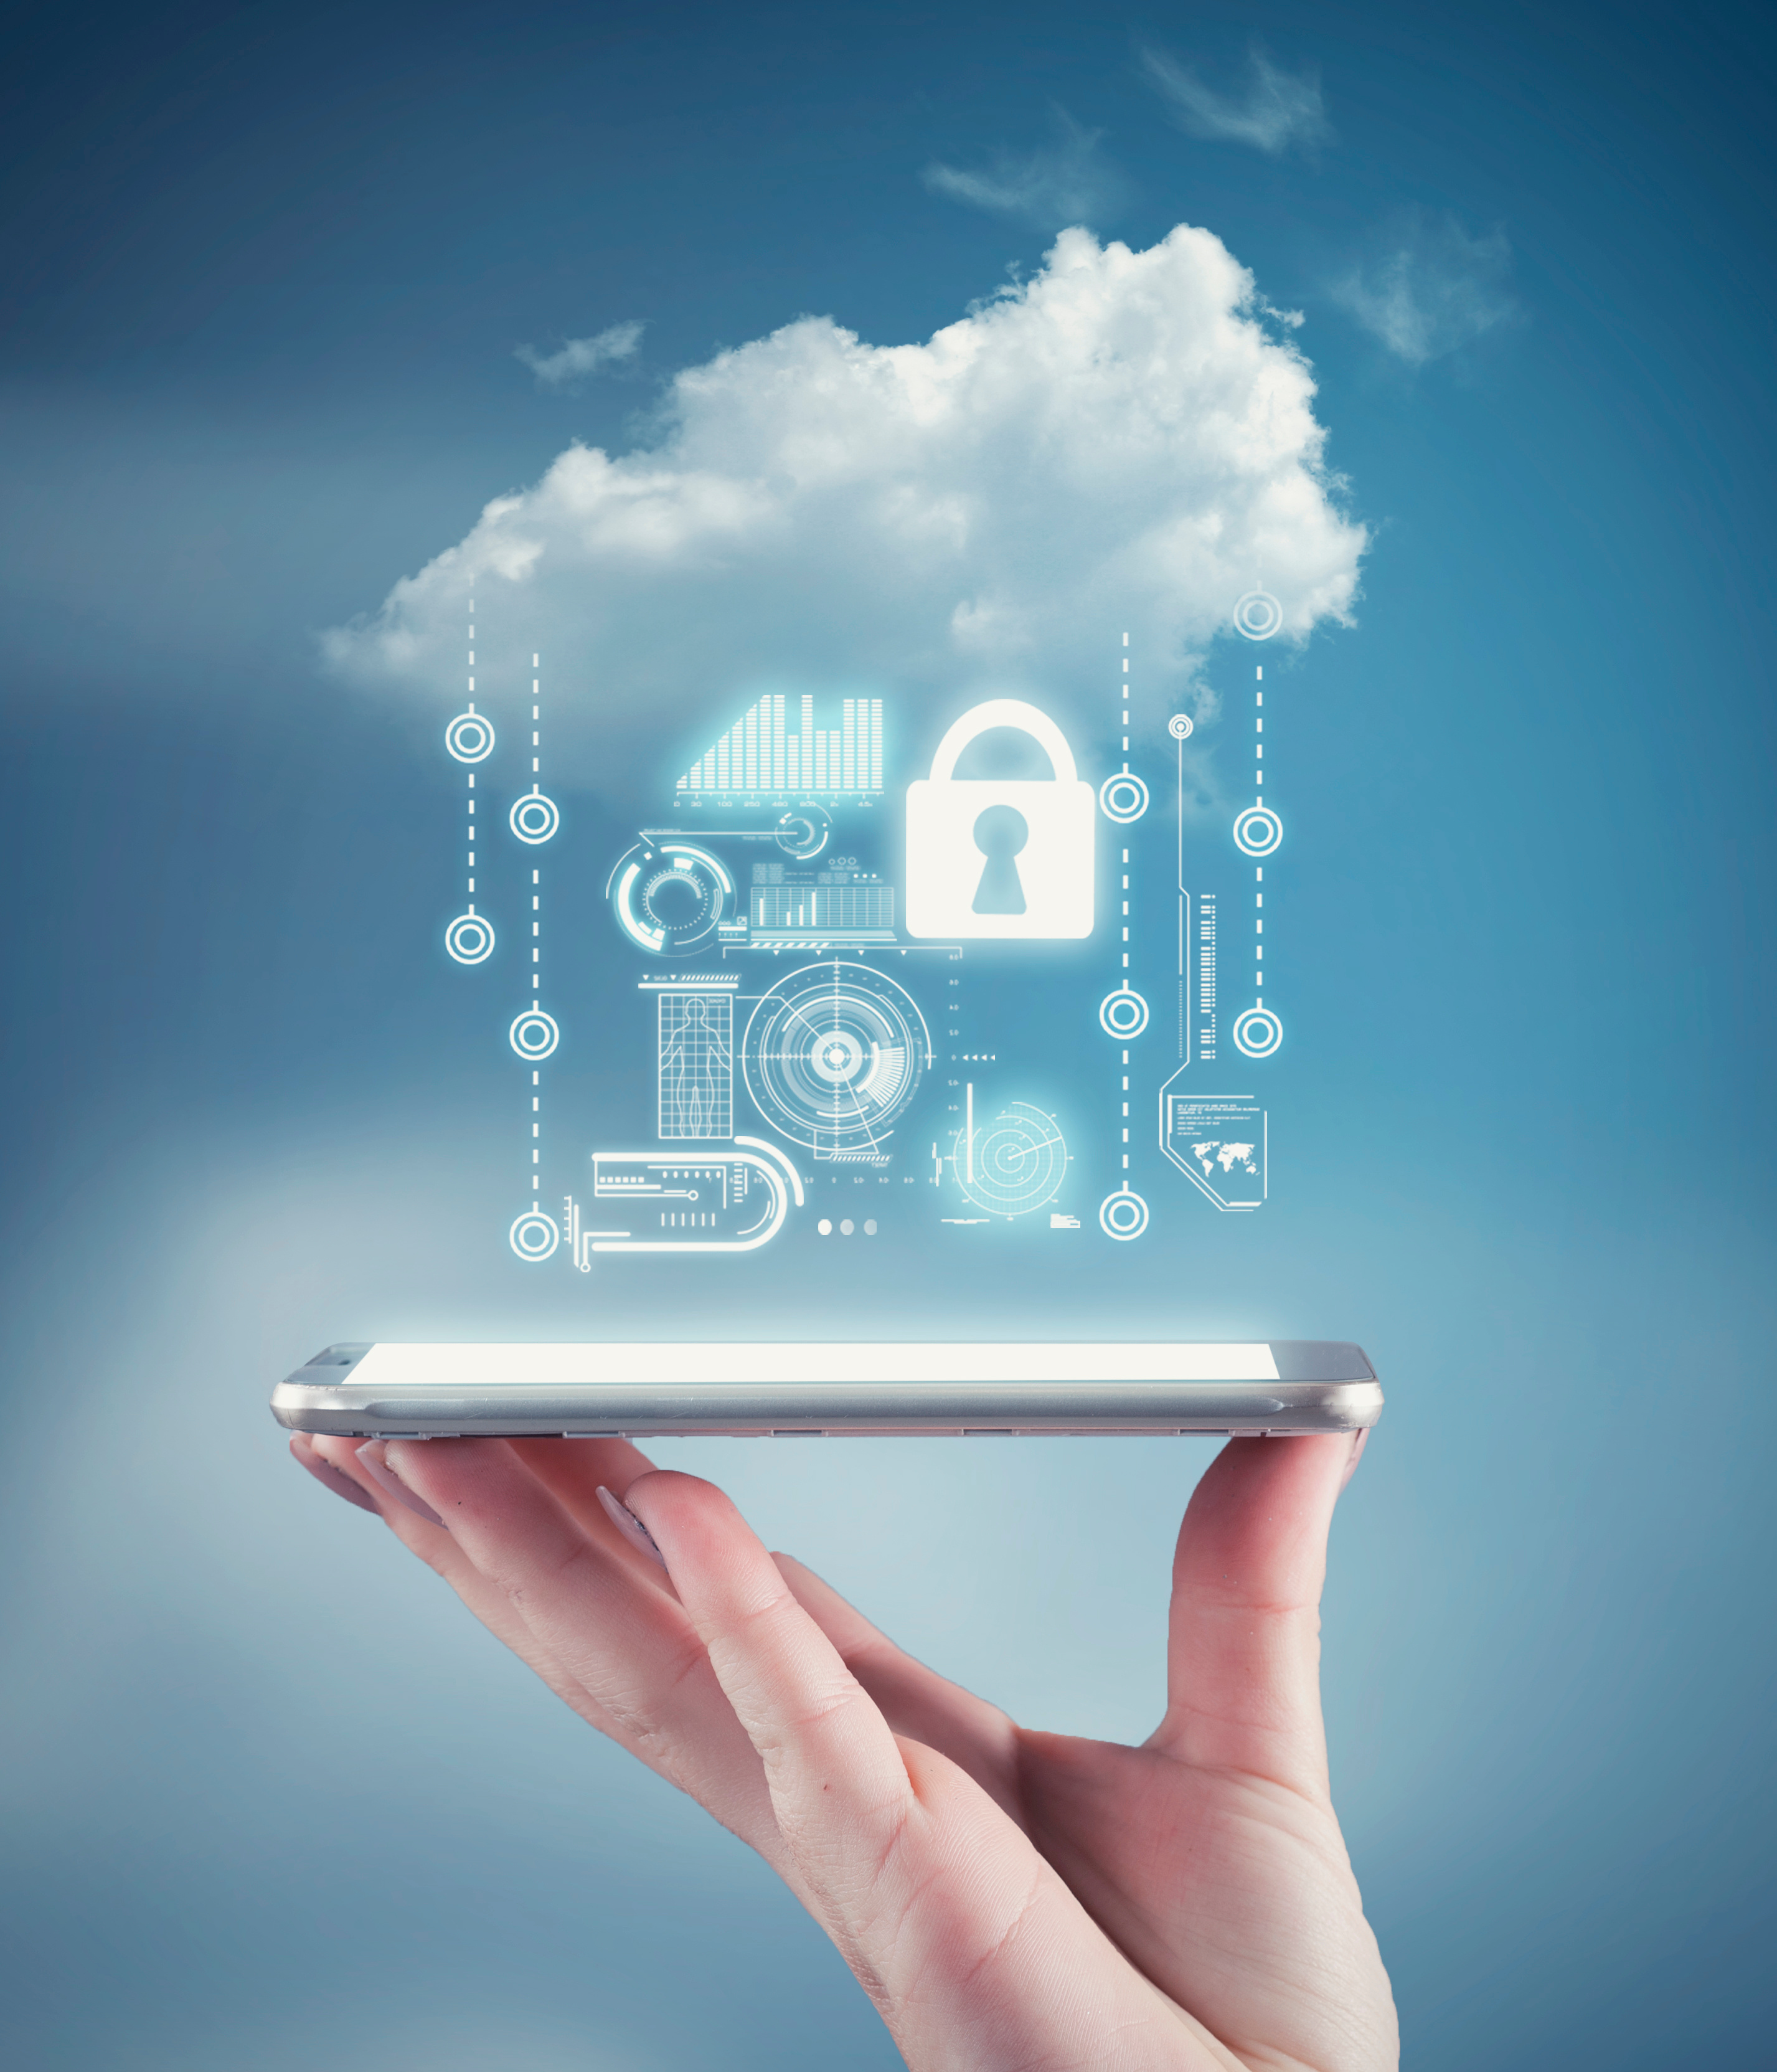 Hand holding a phone with a cloud and personal data information. The concept of personal data security